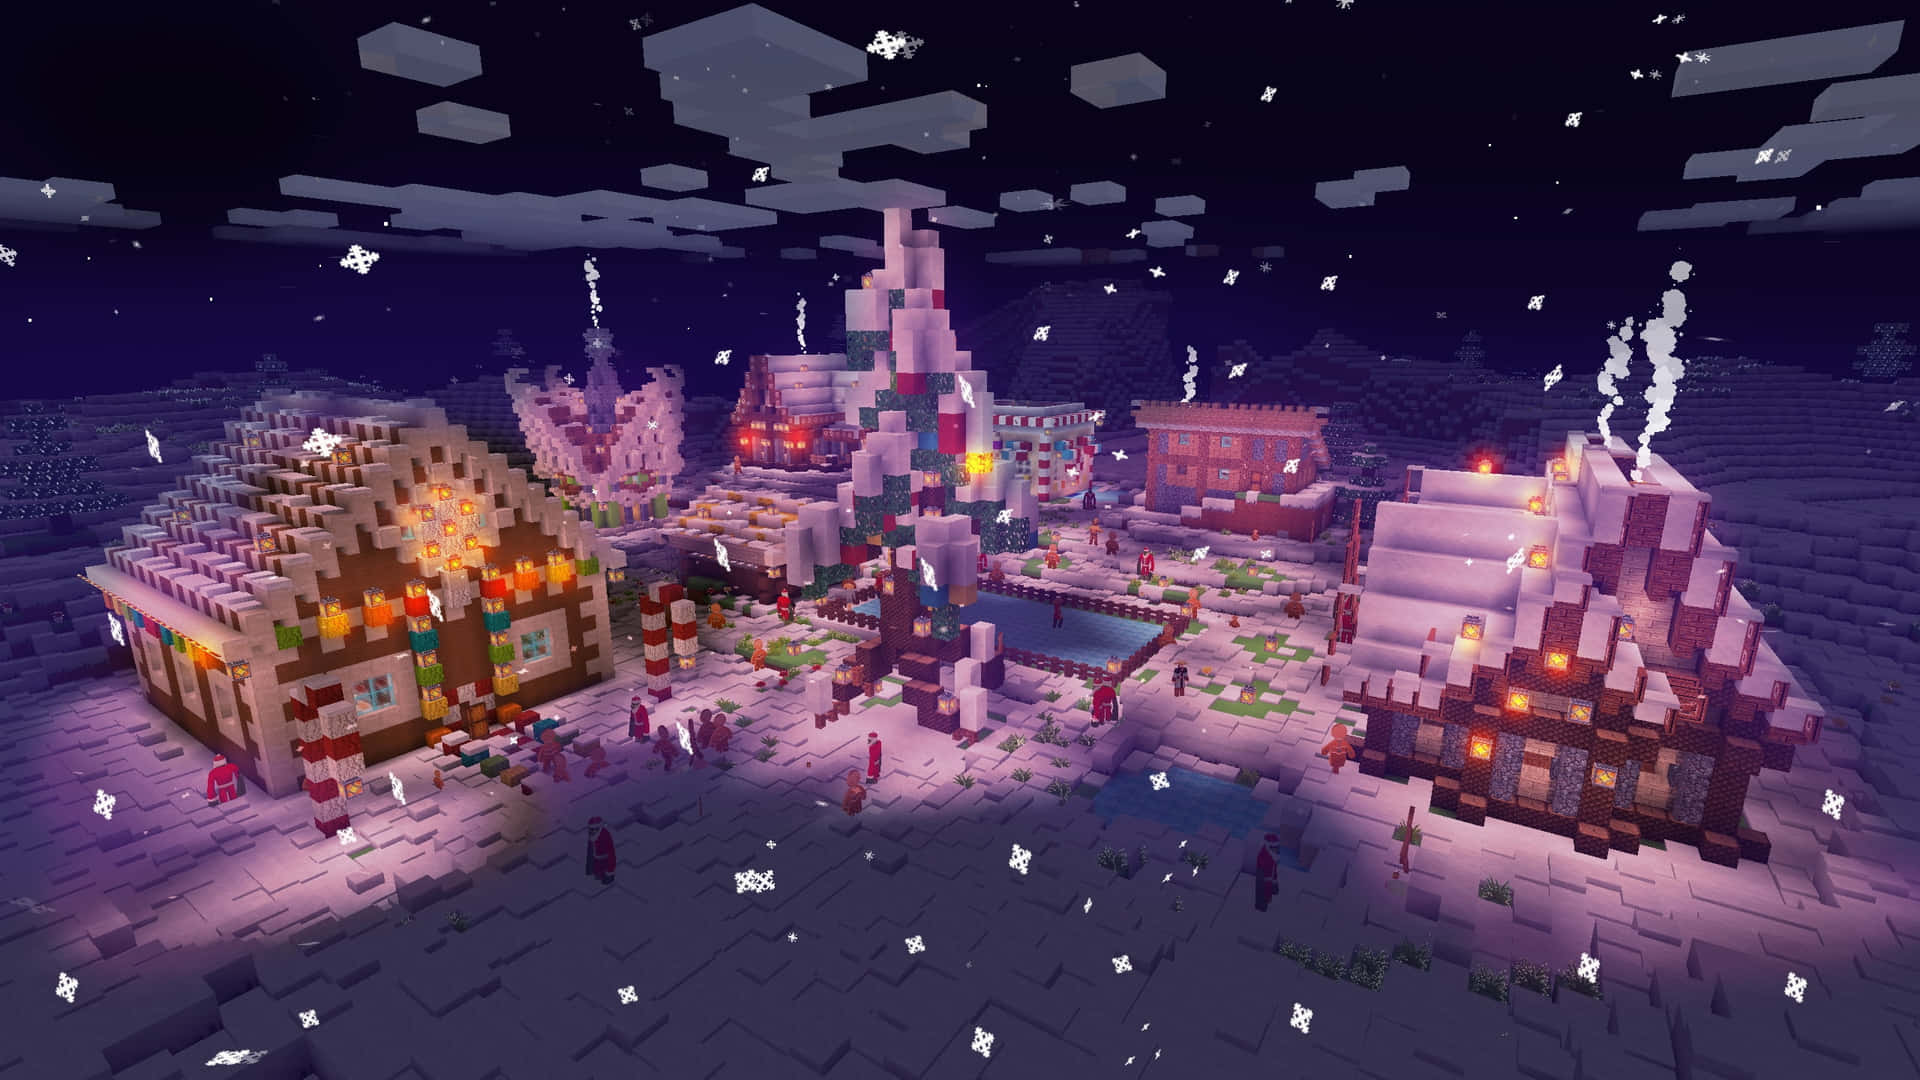 A Minecraft Village With Snow And Lights